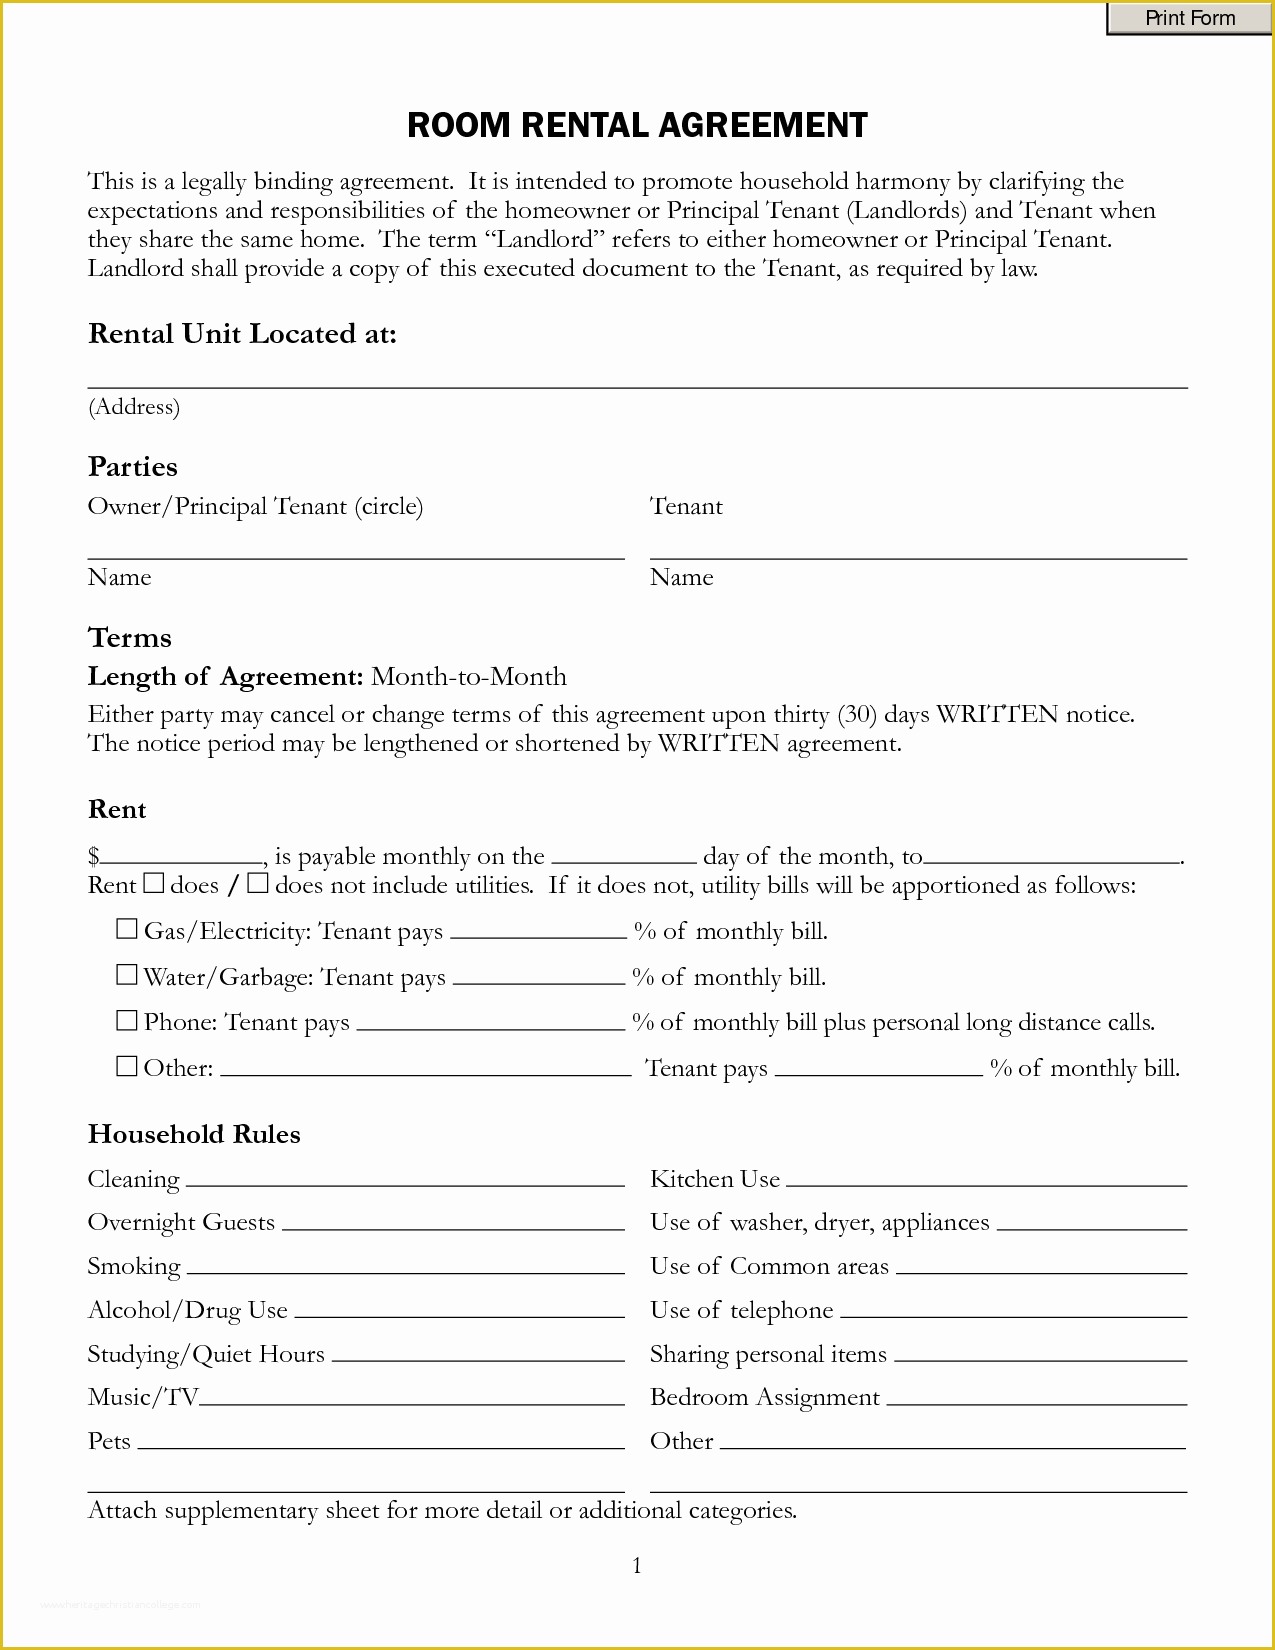 Free Room Rental Agreement Template Of Free Room Rental Lease Agreement Template